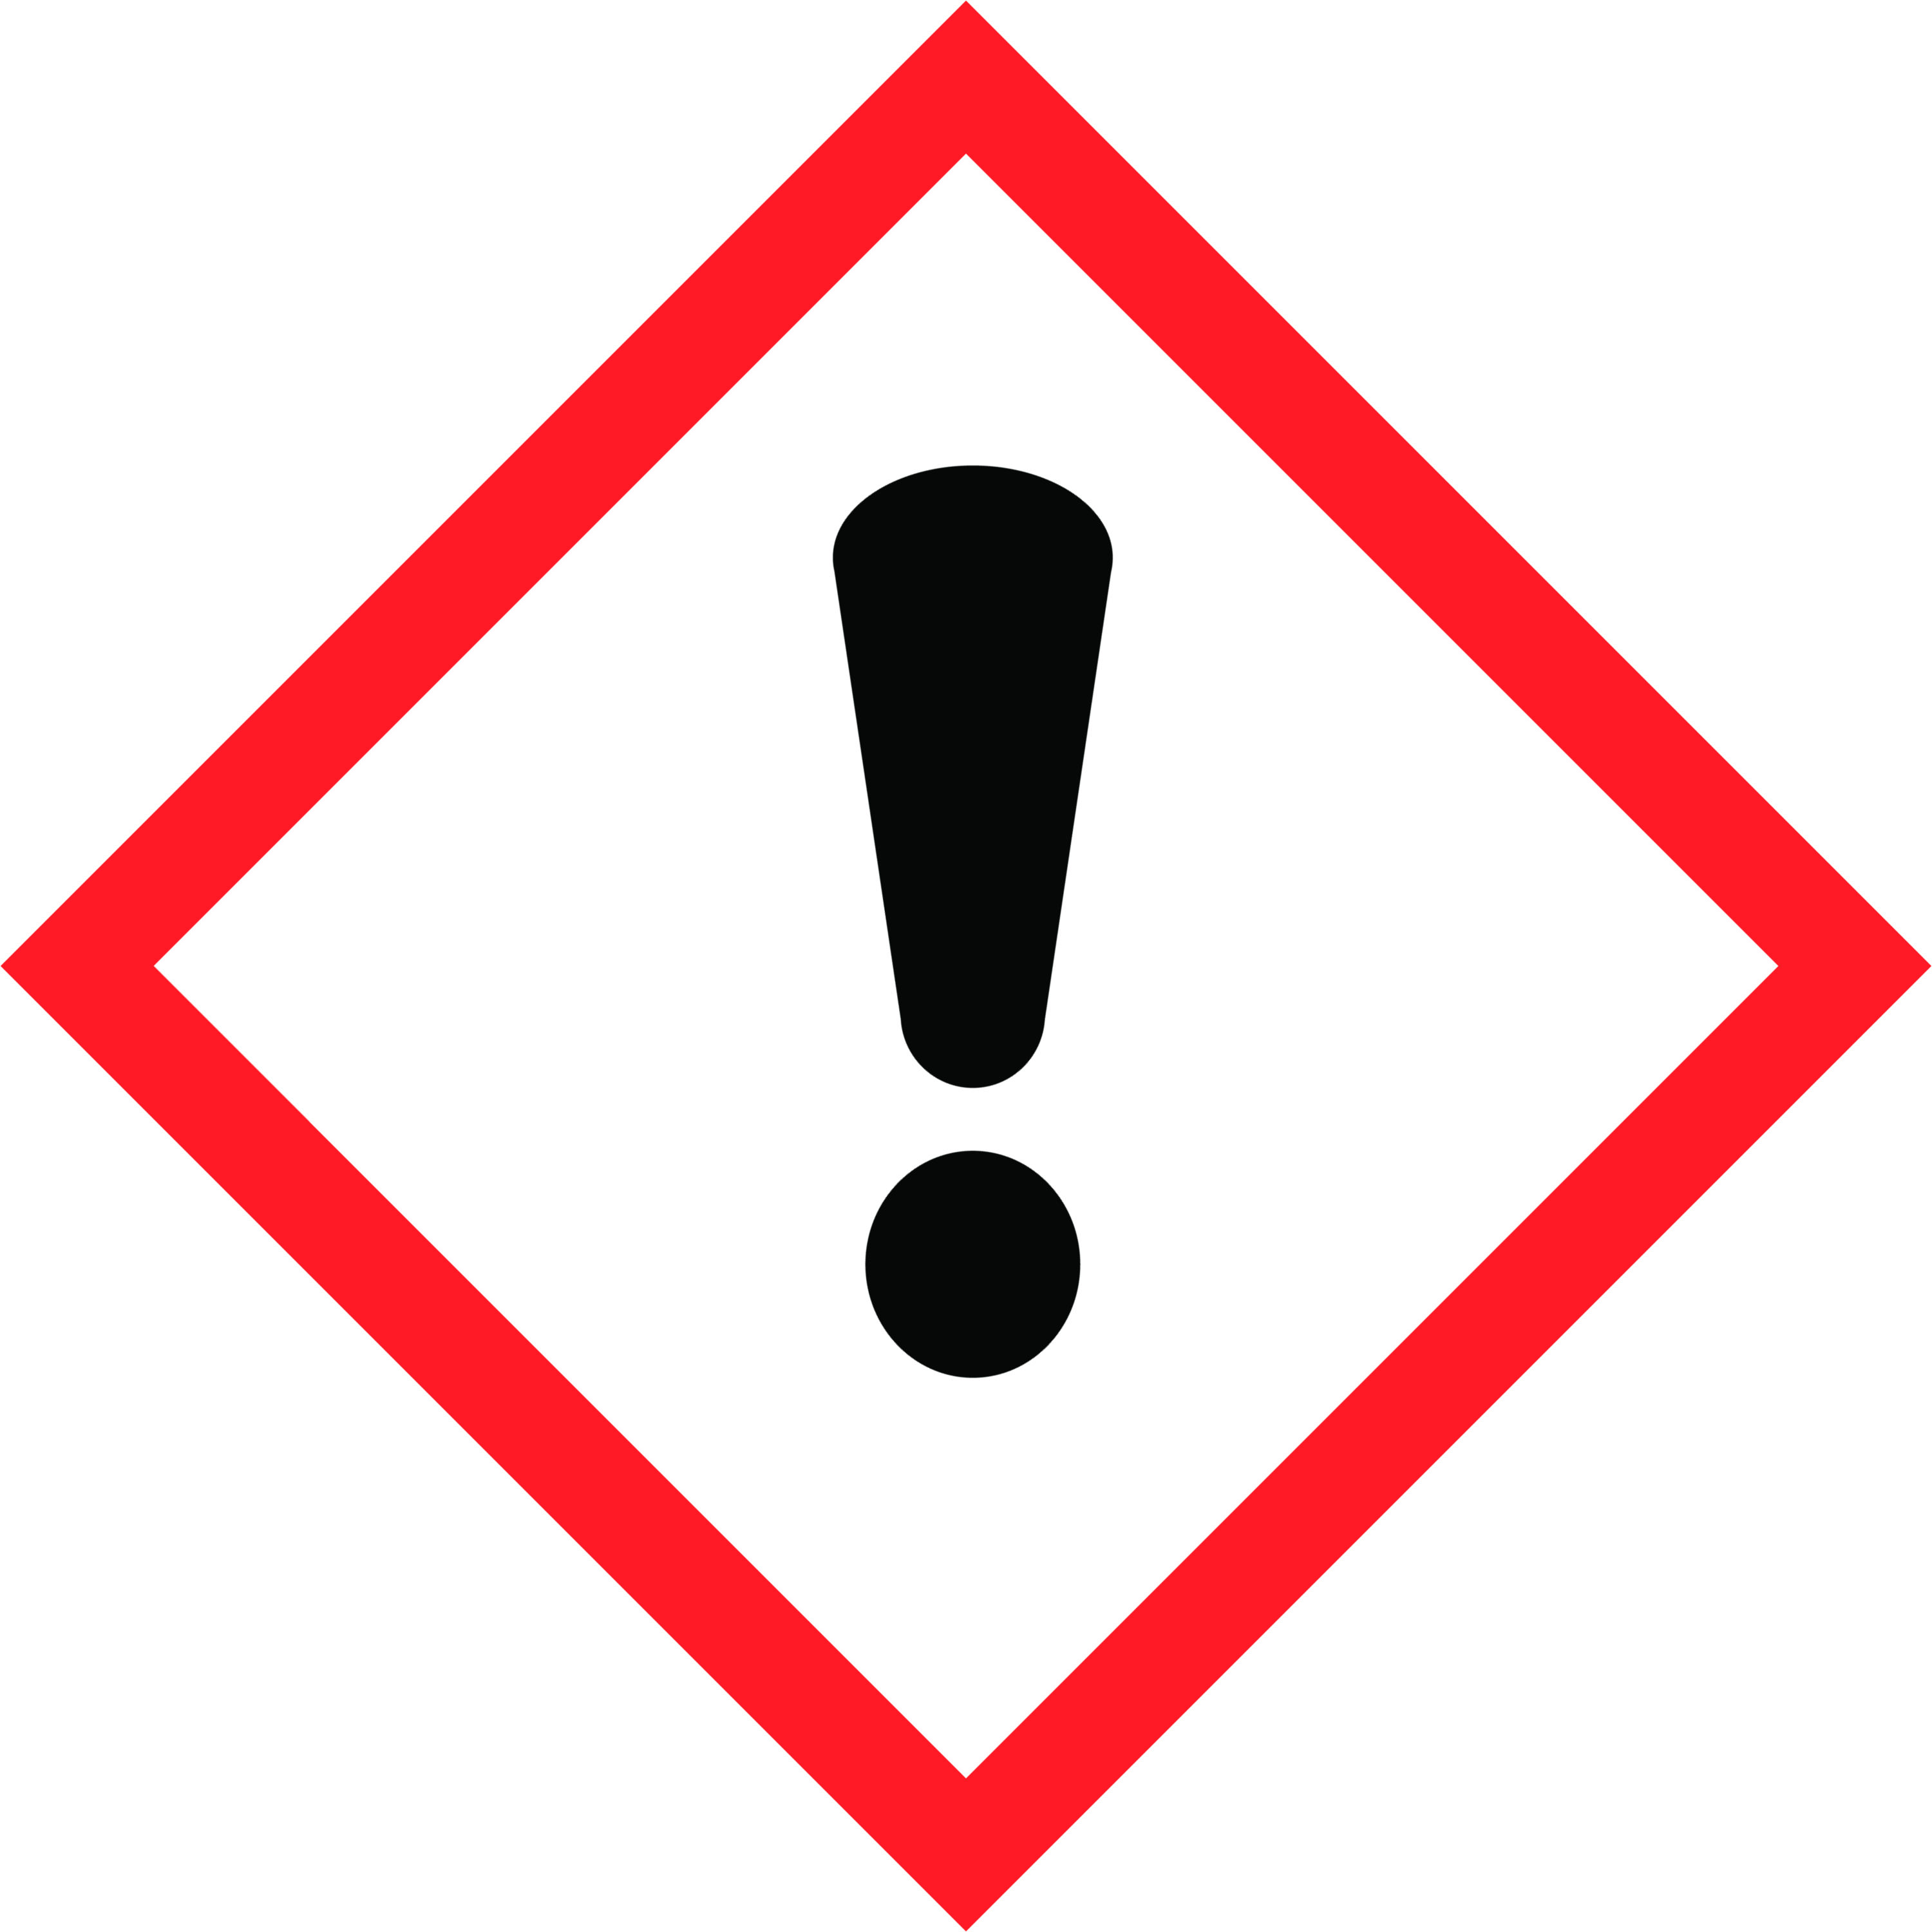 Danger Toxic Cat - Exclamation Mark Pictogram (3000x3000)